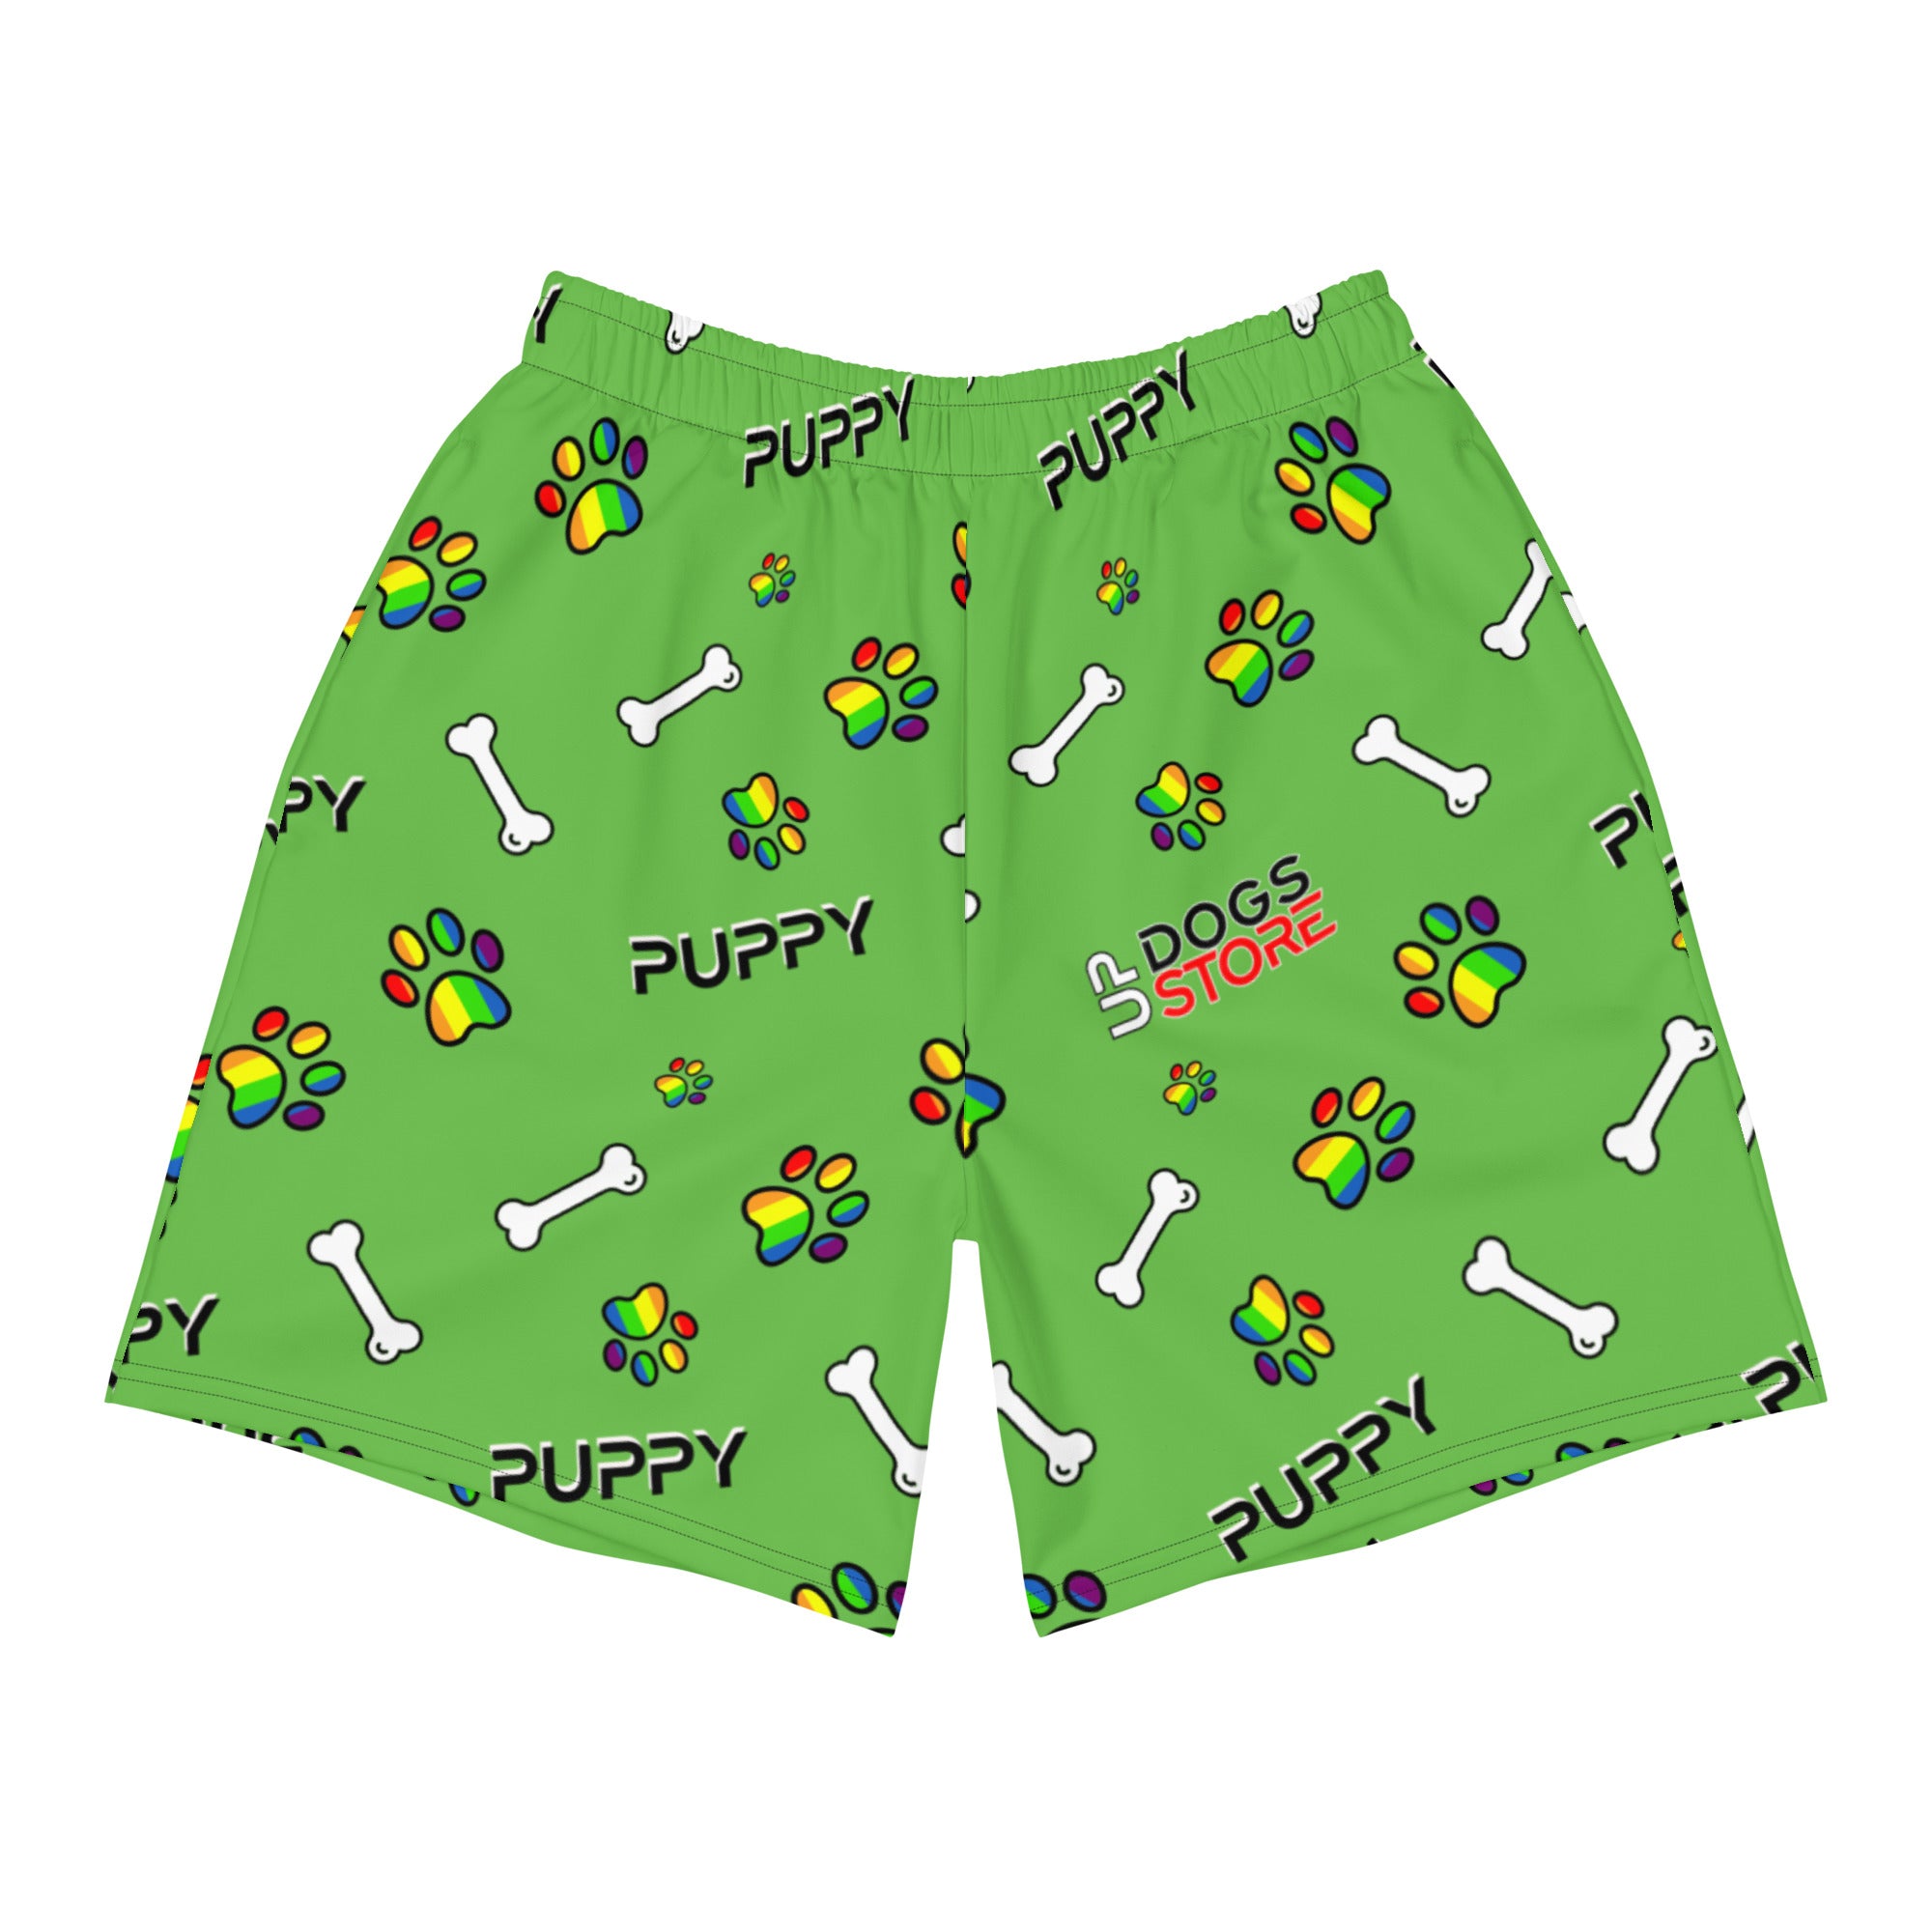 Puppy Play / Sports Pants